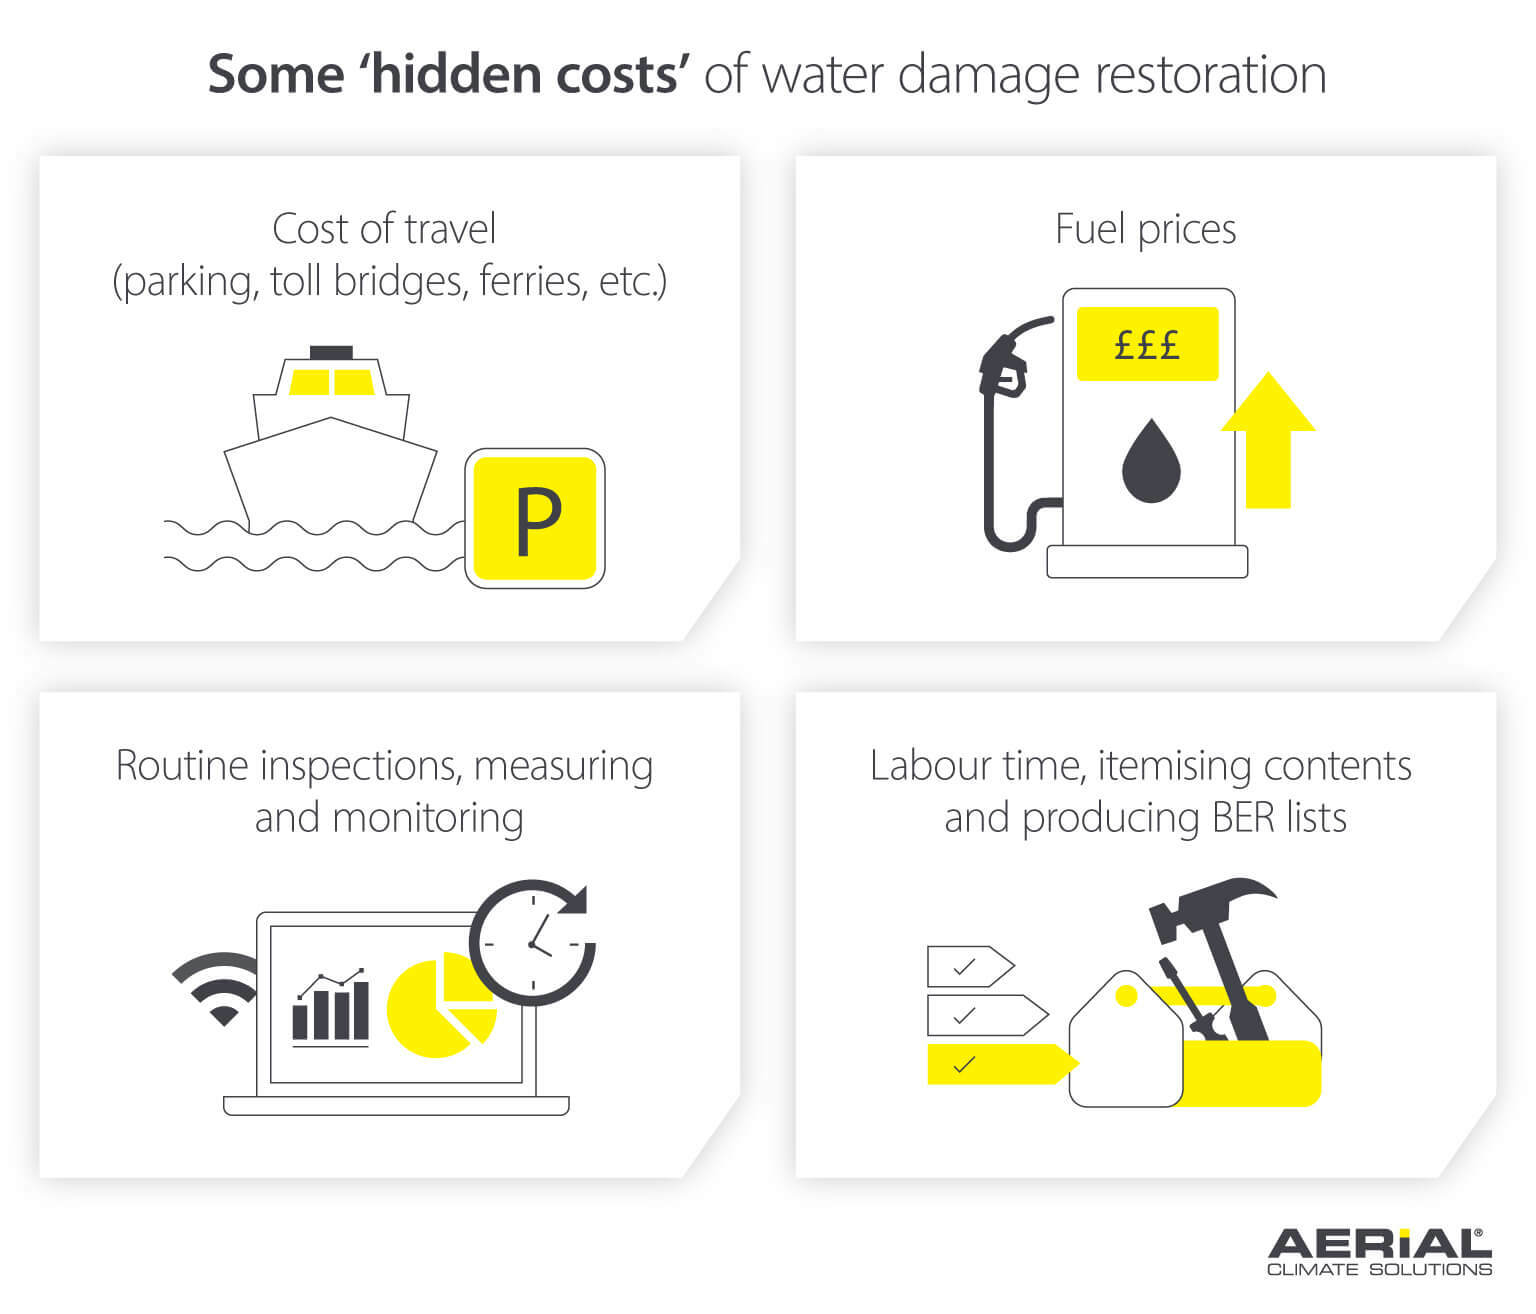 The hidden costs of water damage restoration for professionals and customers - Infographic image